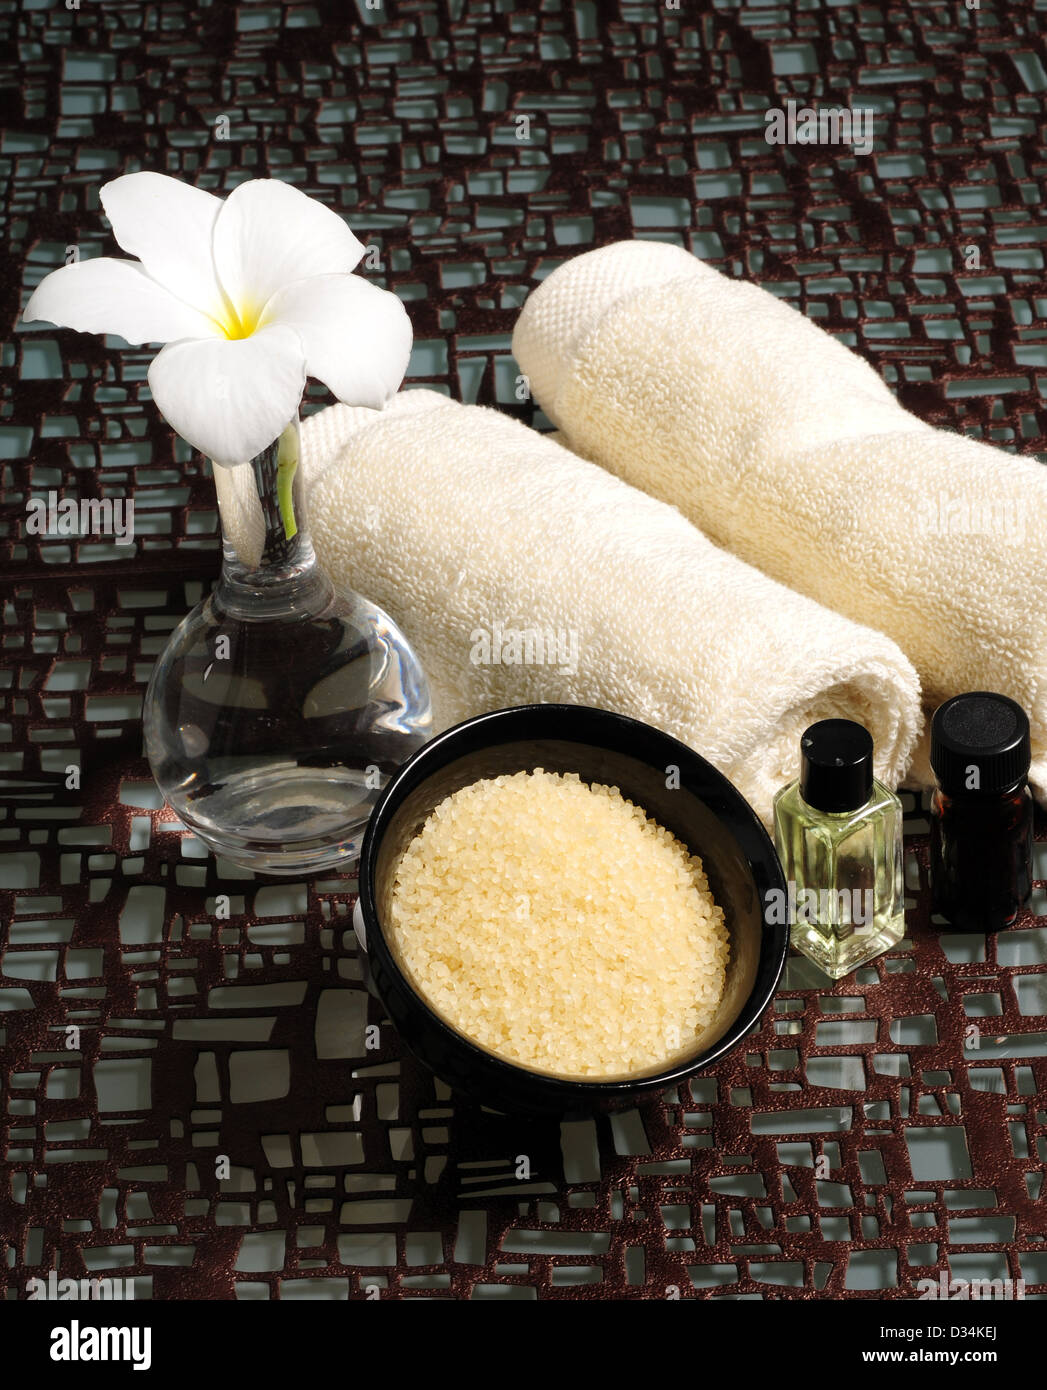 Spa experience with aromatherapy and bath salts Stock Photo